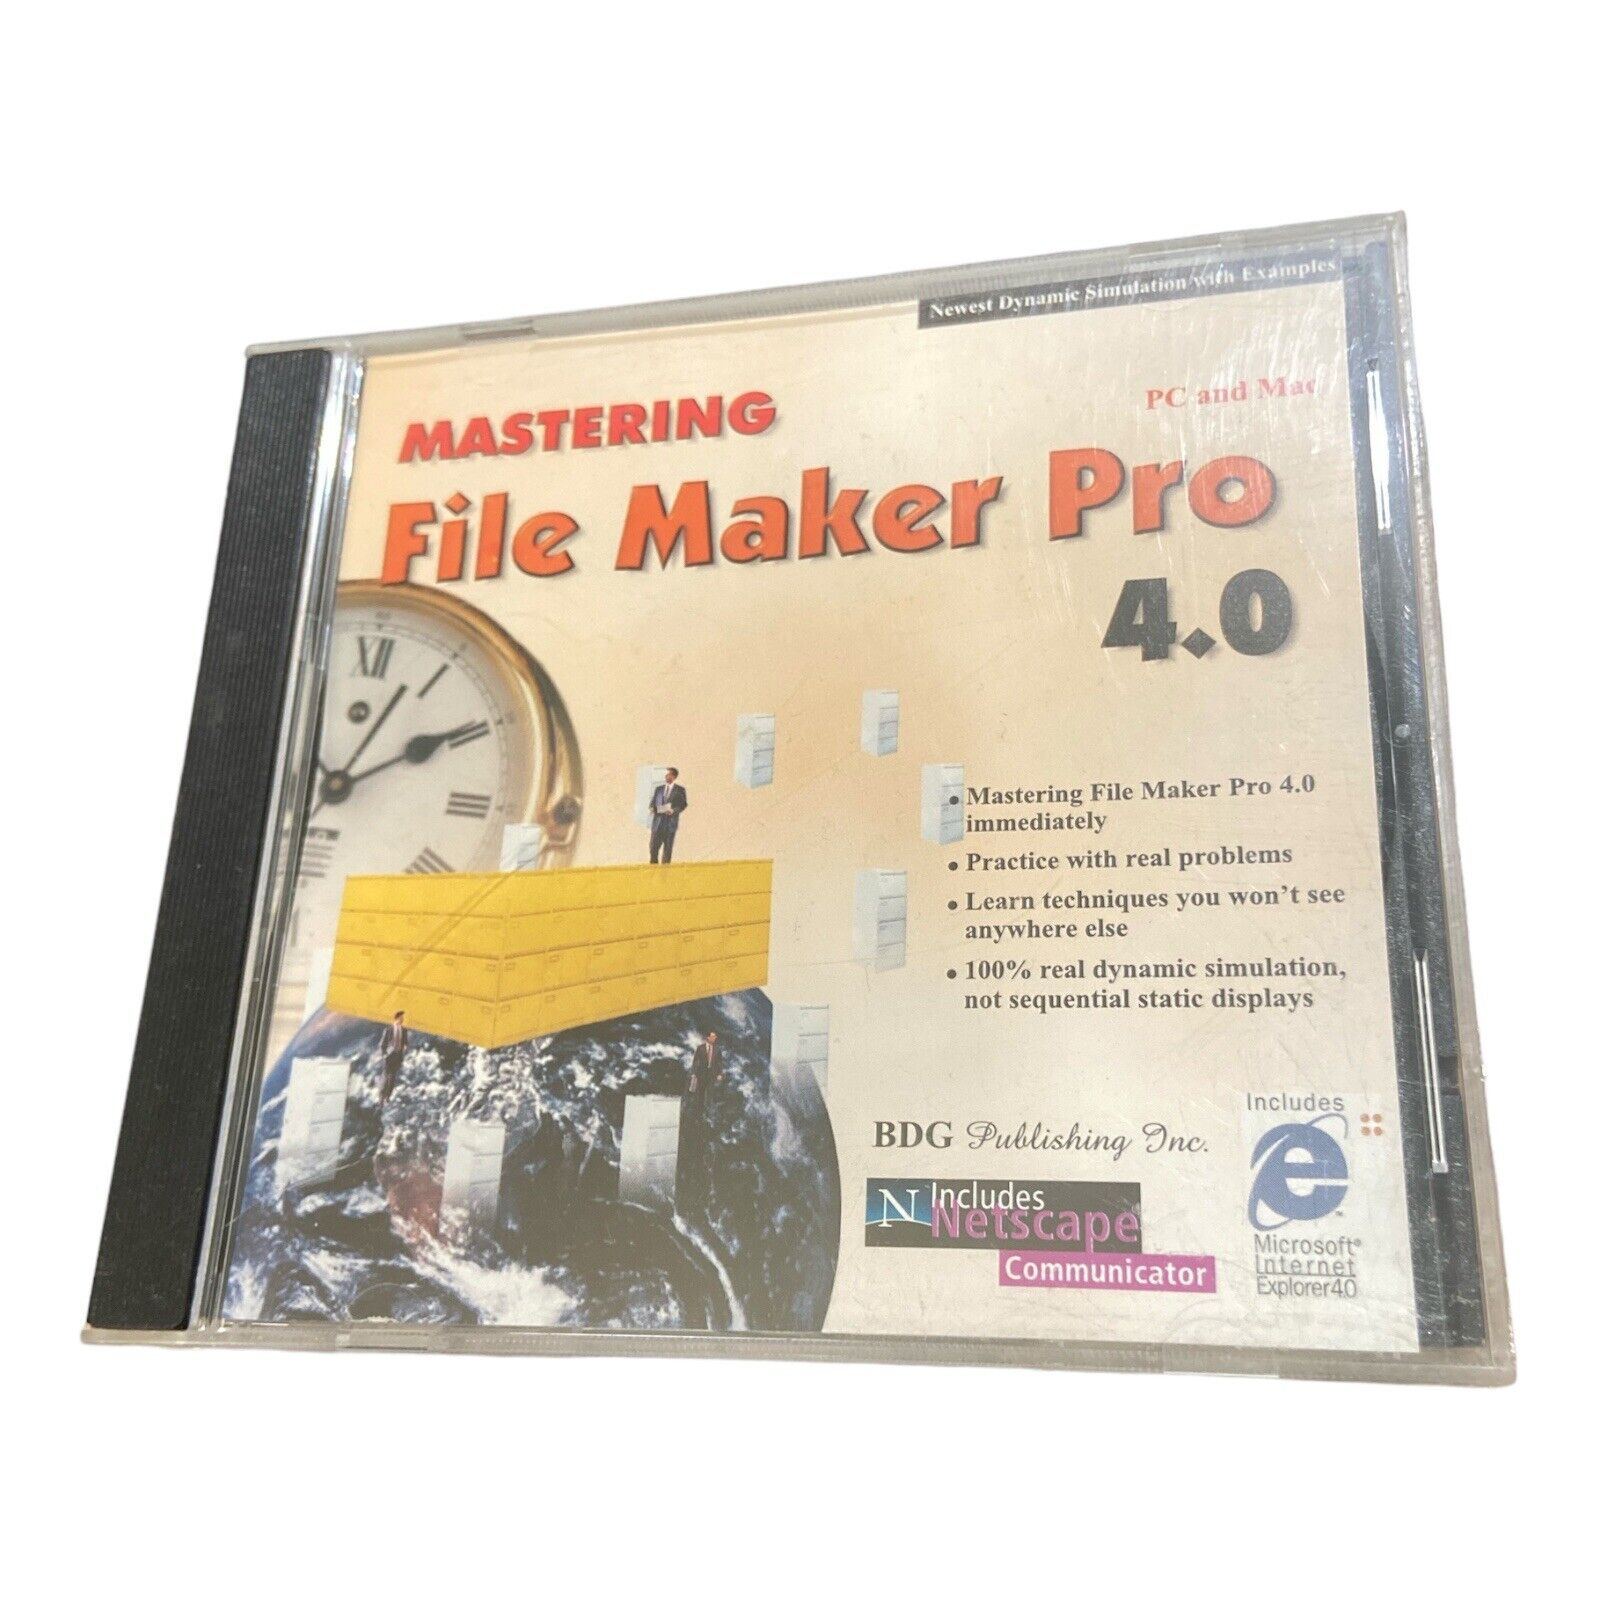 Vintage Mastering FileMaker Pro 4.0 CD Disc For PC and Mac Simulation W/Examples